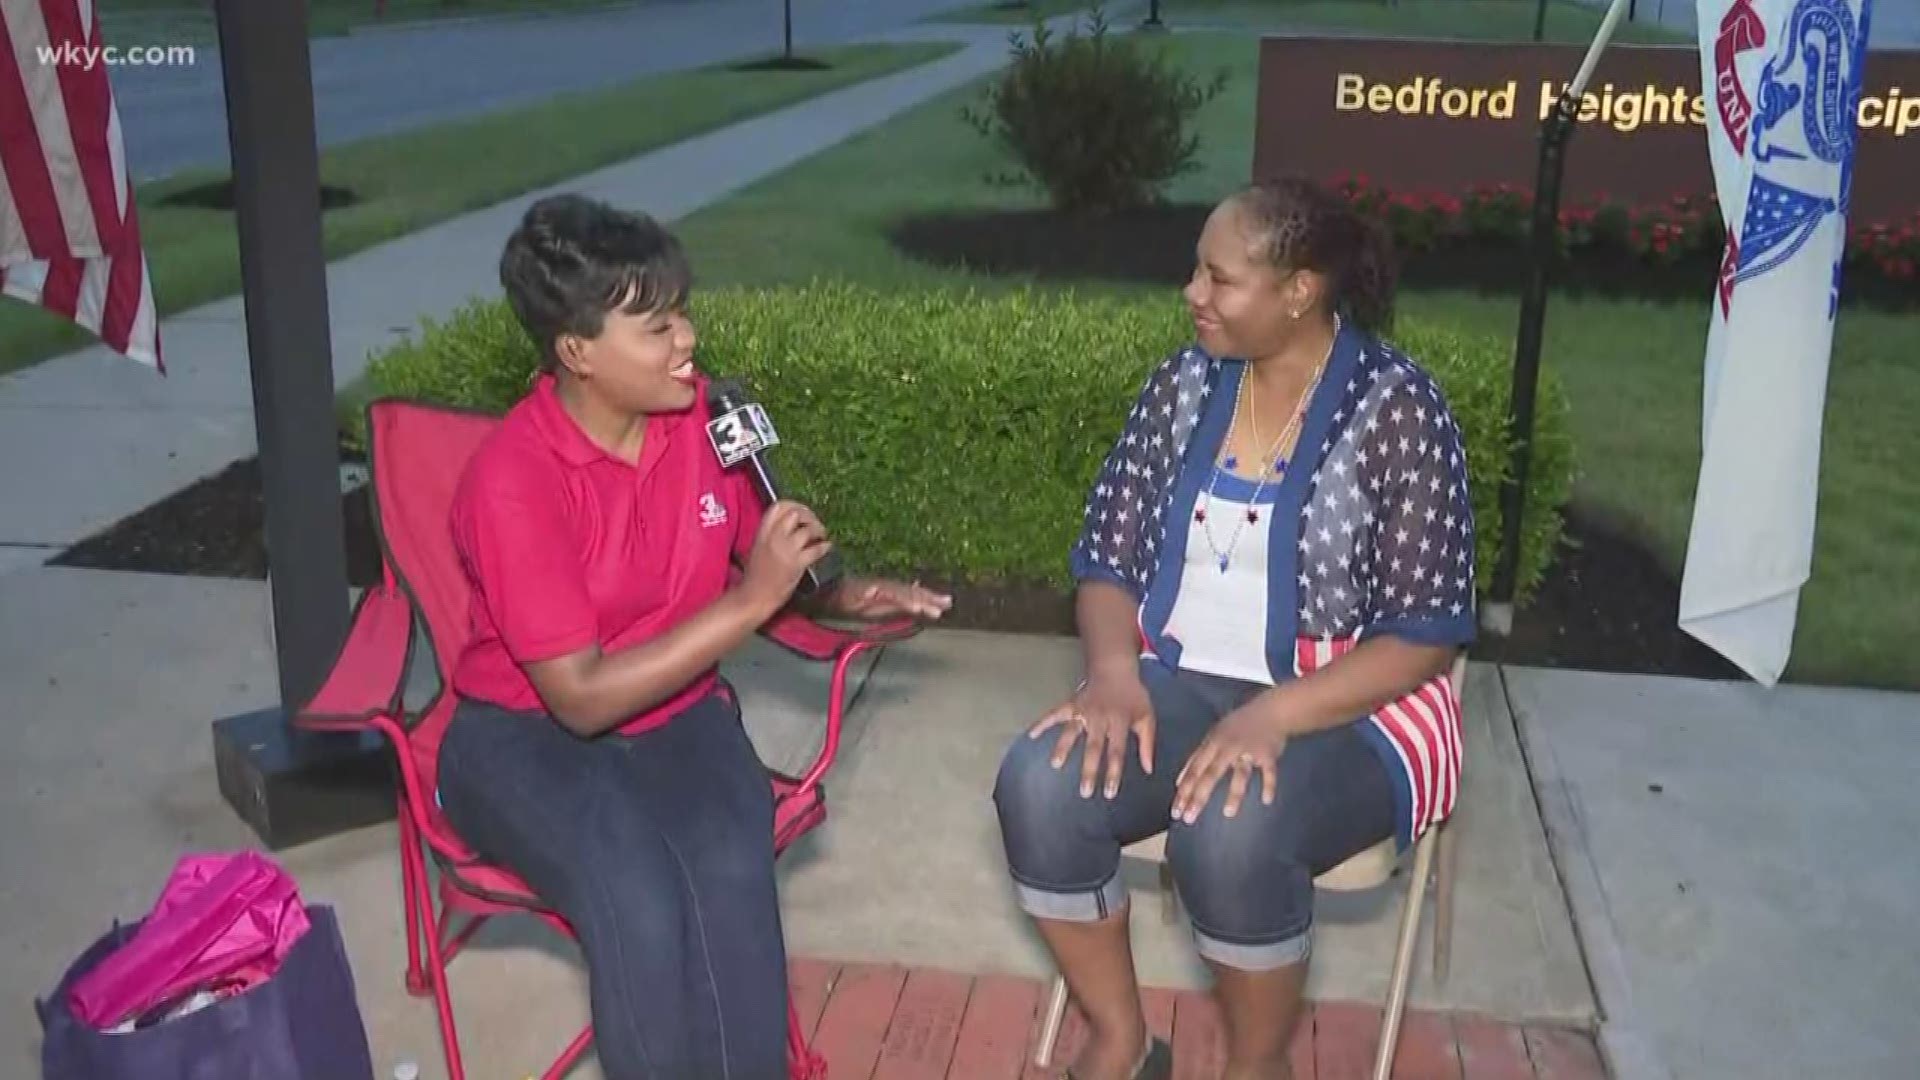 July 4, 2018: WKYC's Danielle Wiggins has a preview of what you can expect from the 2018 Bedford Heights parade.